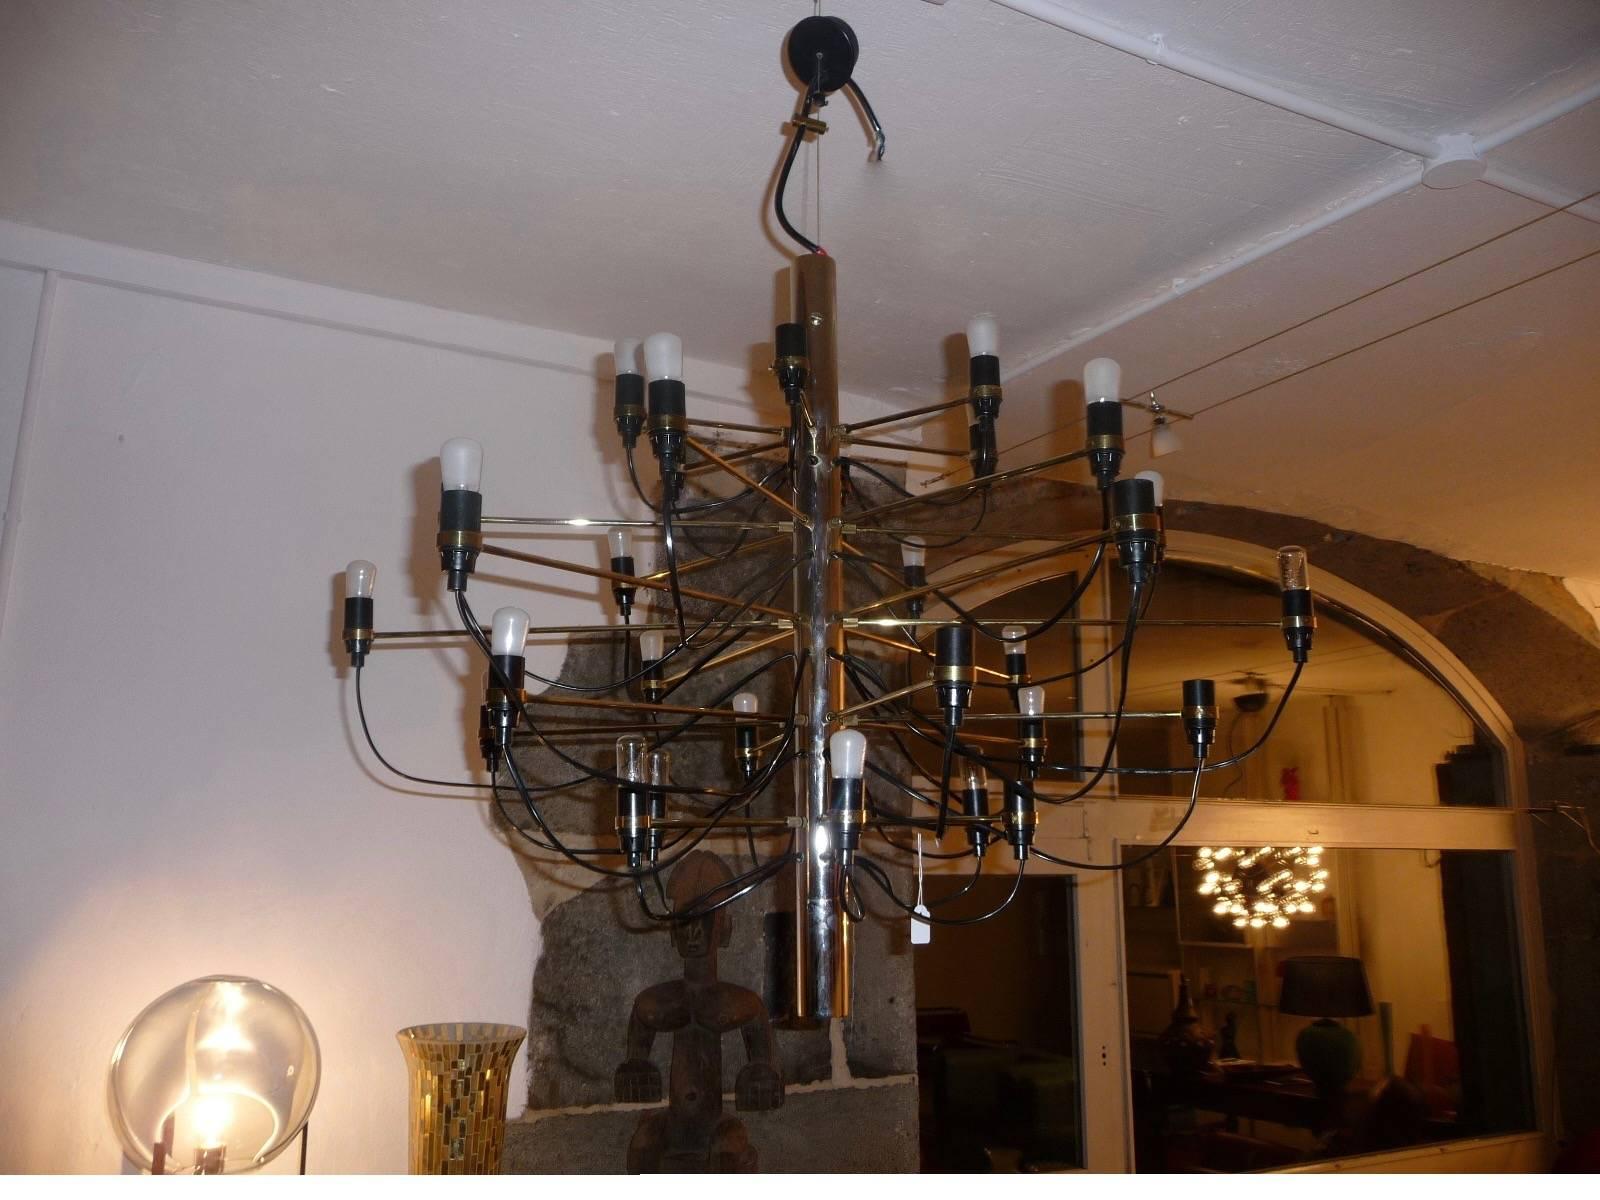 2097/30 suspension Arteluce (after purchased by Flos), established in 1958 by Gino Sarfatti. 2097. Central structure is made of iron chrome and brass arms.

Two switching lighting mode.

Brass finish.
Steel structure.
30 fluorescent bulbs 15W